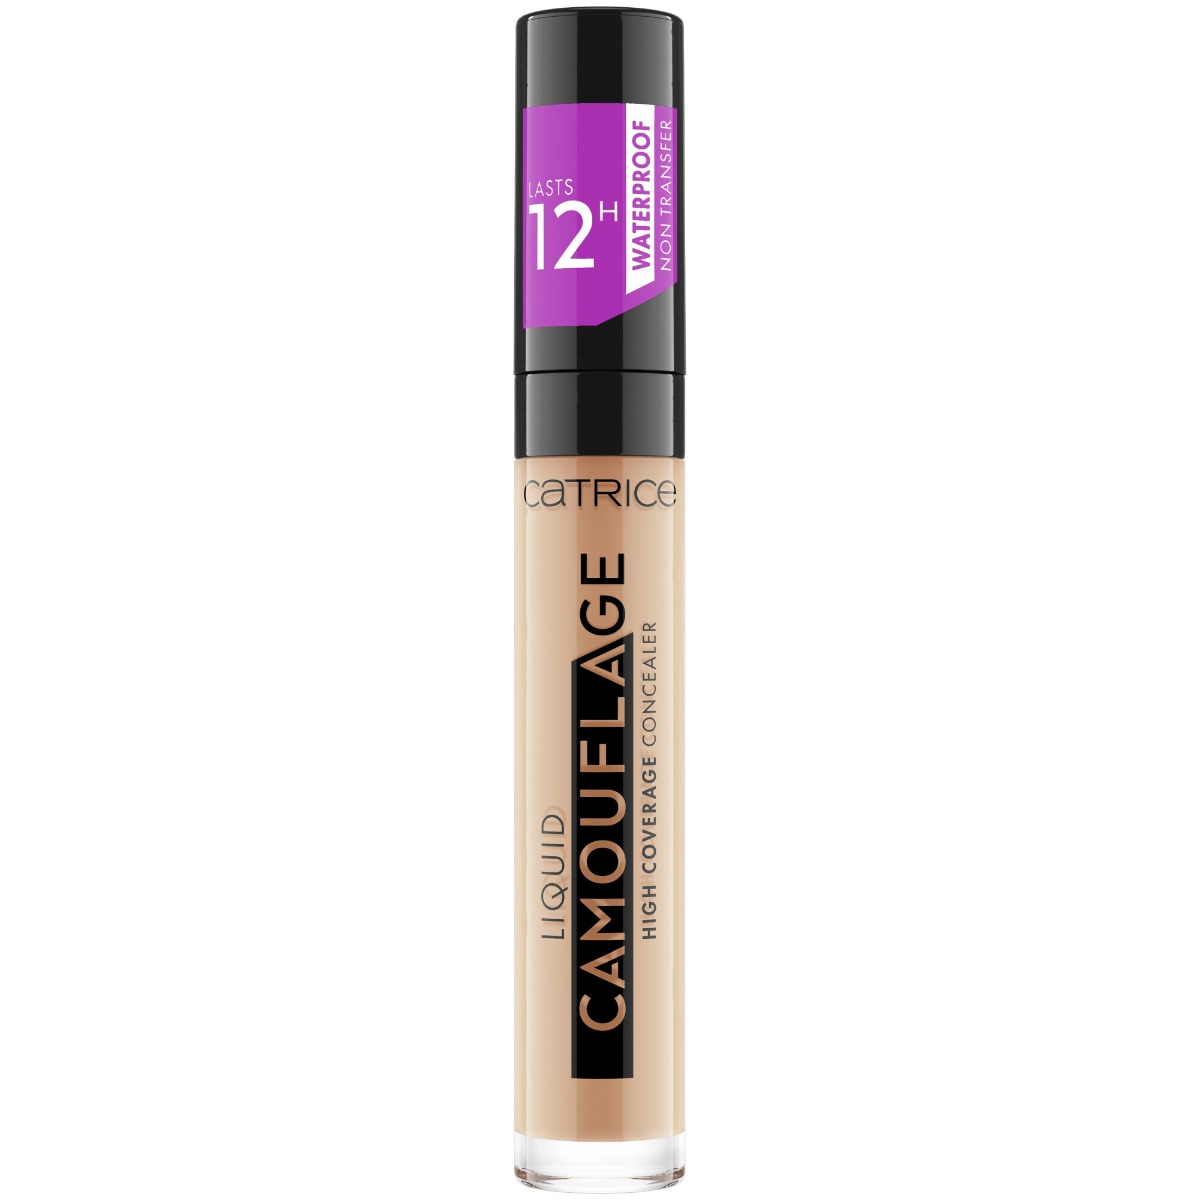 Corector Liquid Camouflage High Coverage Concealer 015 - Honey, 5ml, Catrice